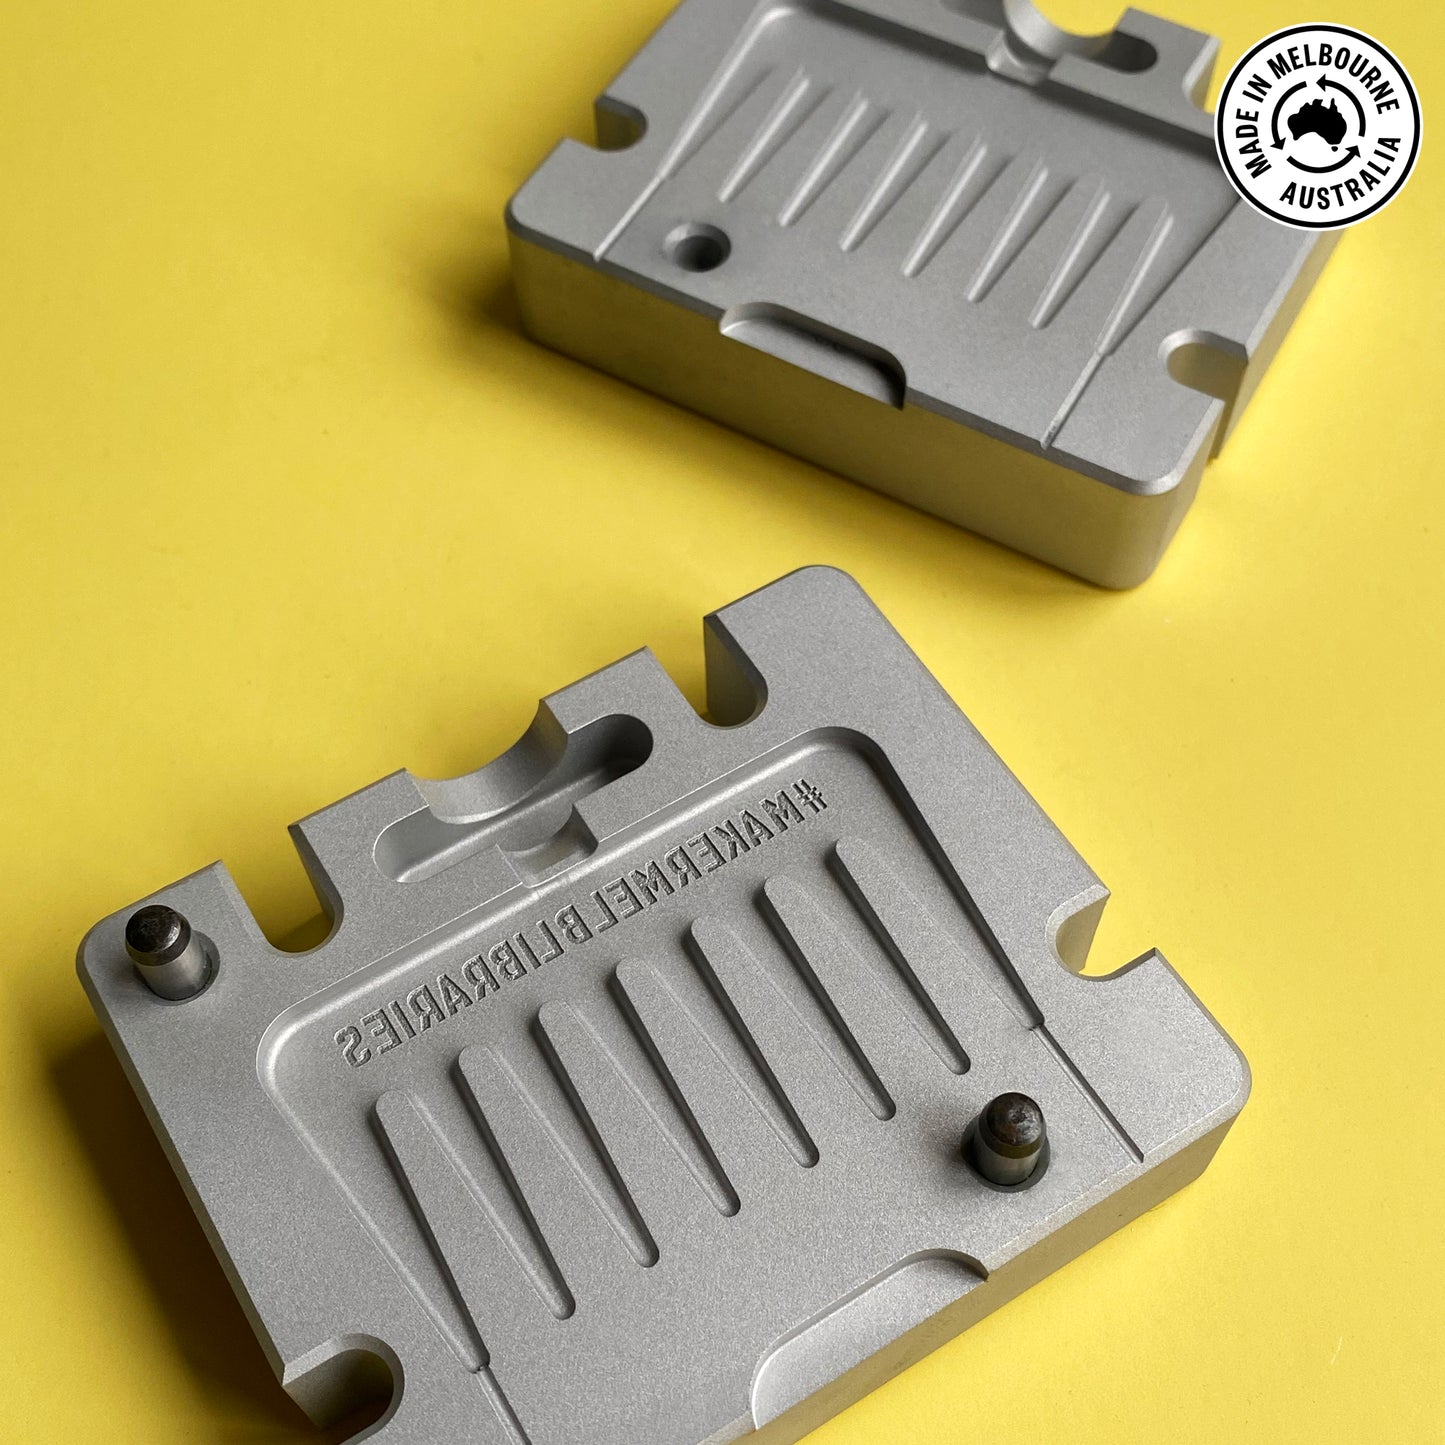 Product mould for making small pocket combs from recycled plastic